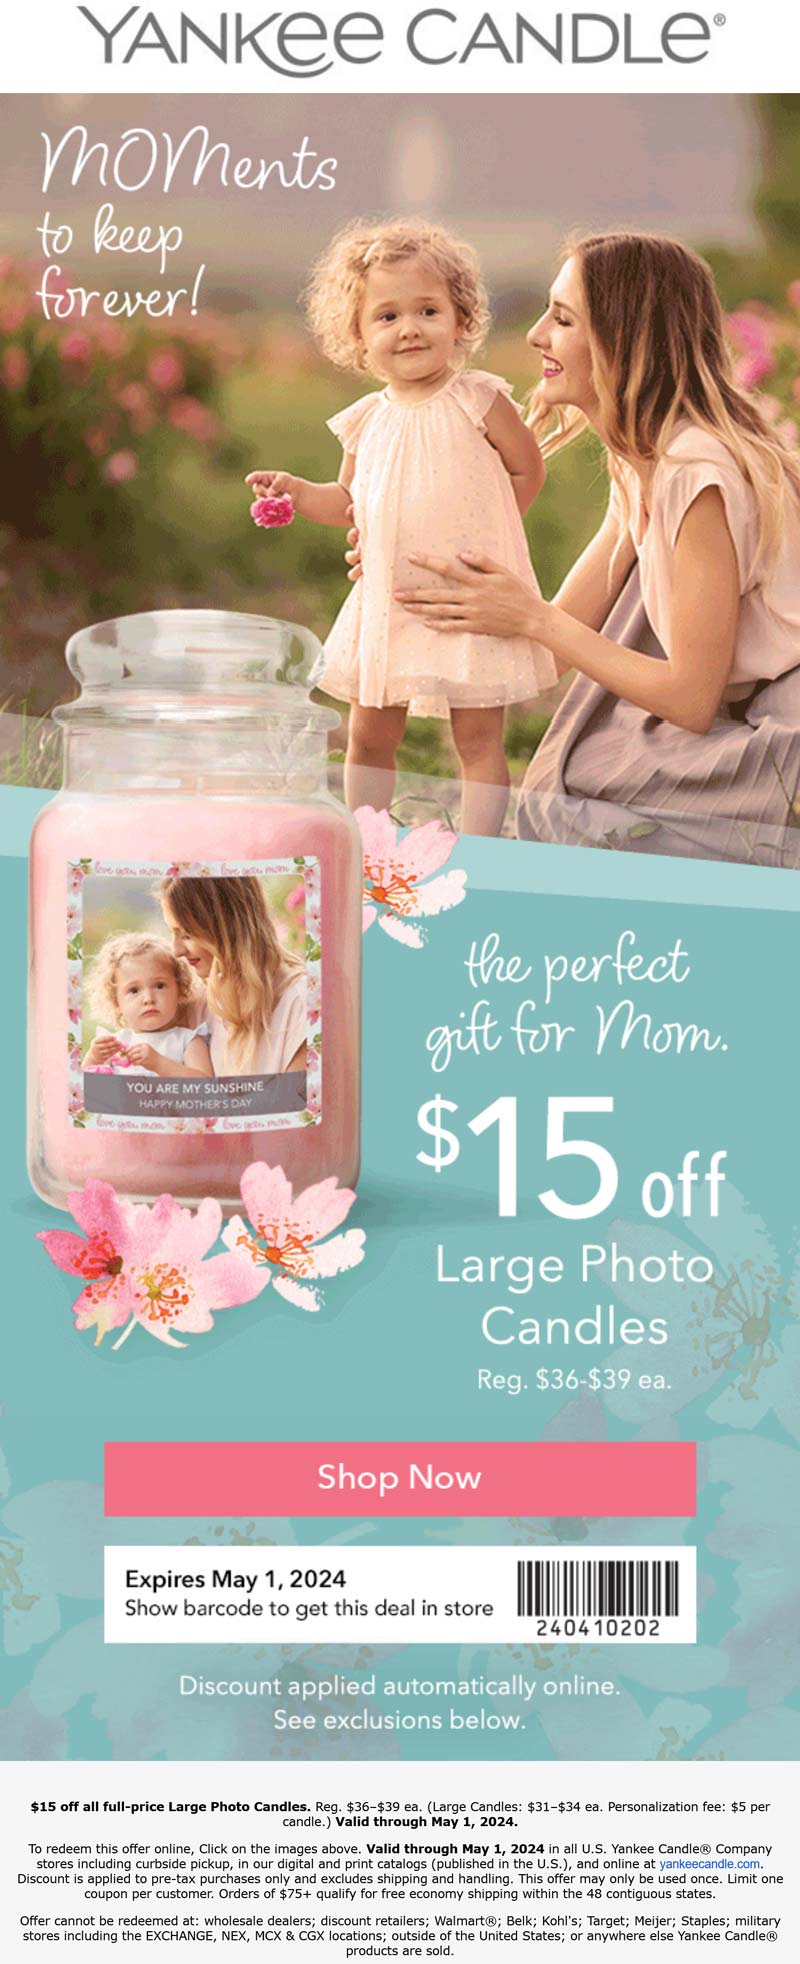 Yankee Candle stores Coupon  $15 off large photo candles at Yankee Candle #yankeecandle 